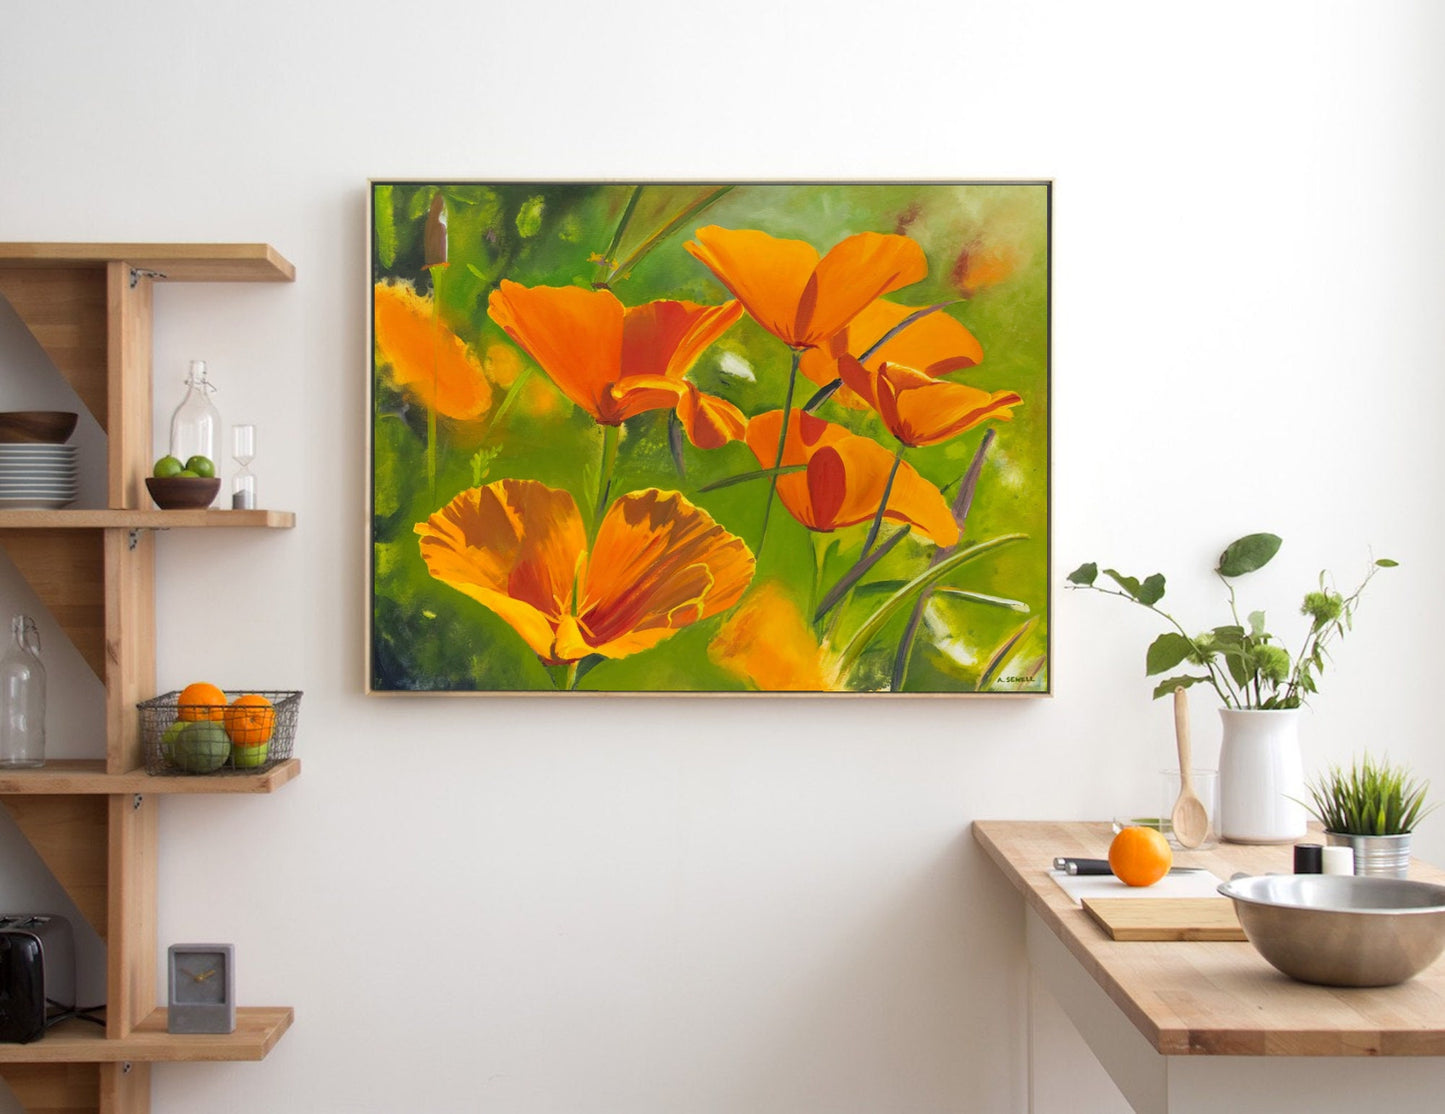 A "California Poppies" - Original painting or Canvas Giclée art print of oil painting of California Poppies